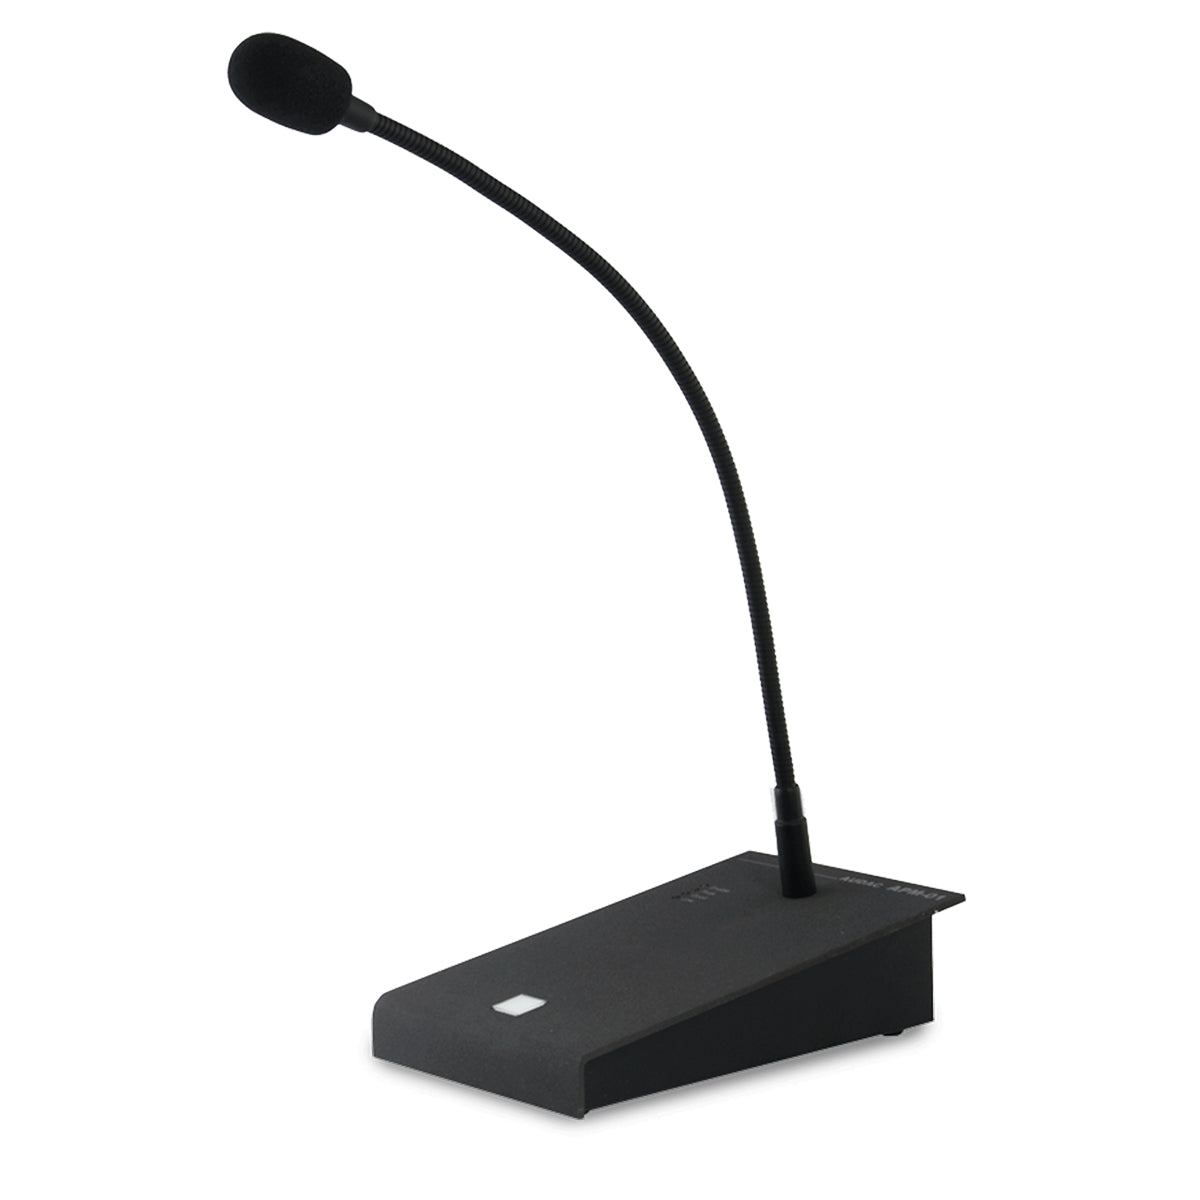 Audac APM101 Digital paging microphone for 1 zone